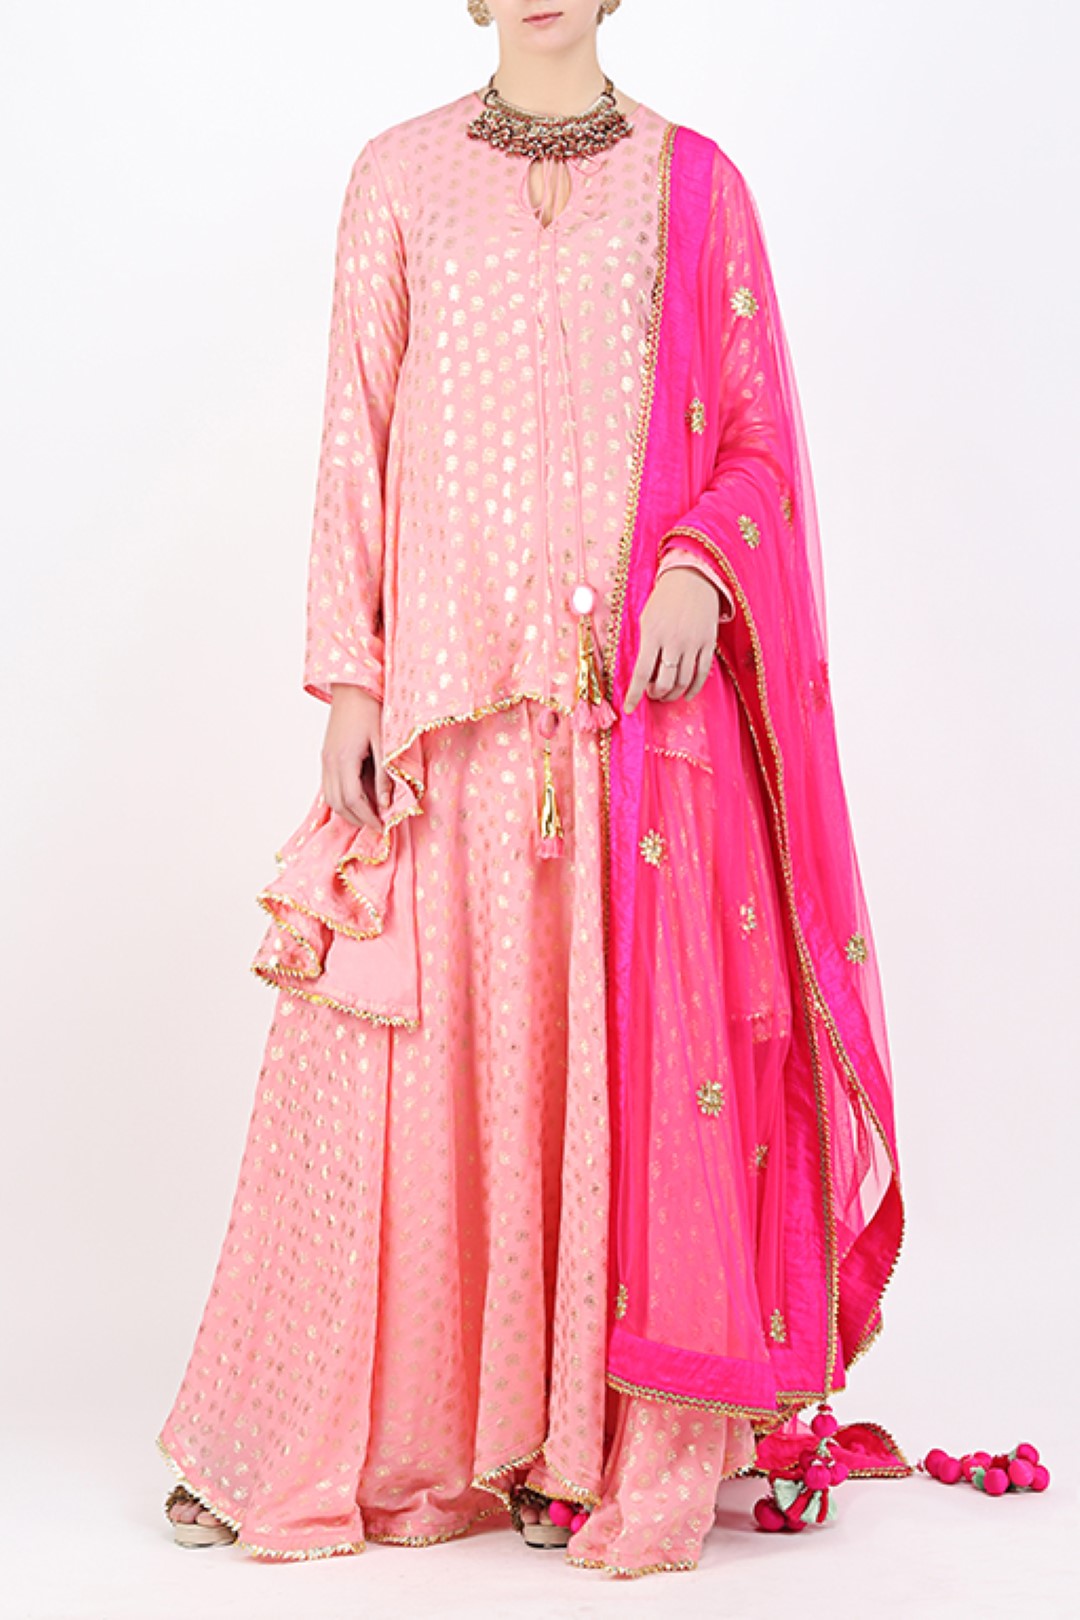 ROSE PINK GOLD PRINTED ASYMMETRICAL TUNIC WITH FOIL PRINTED ASYMMETRICAL SKIRT WITH DUPATTA.